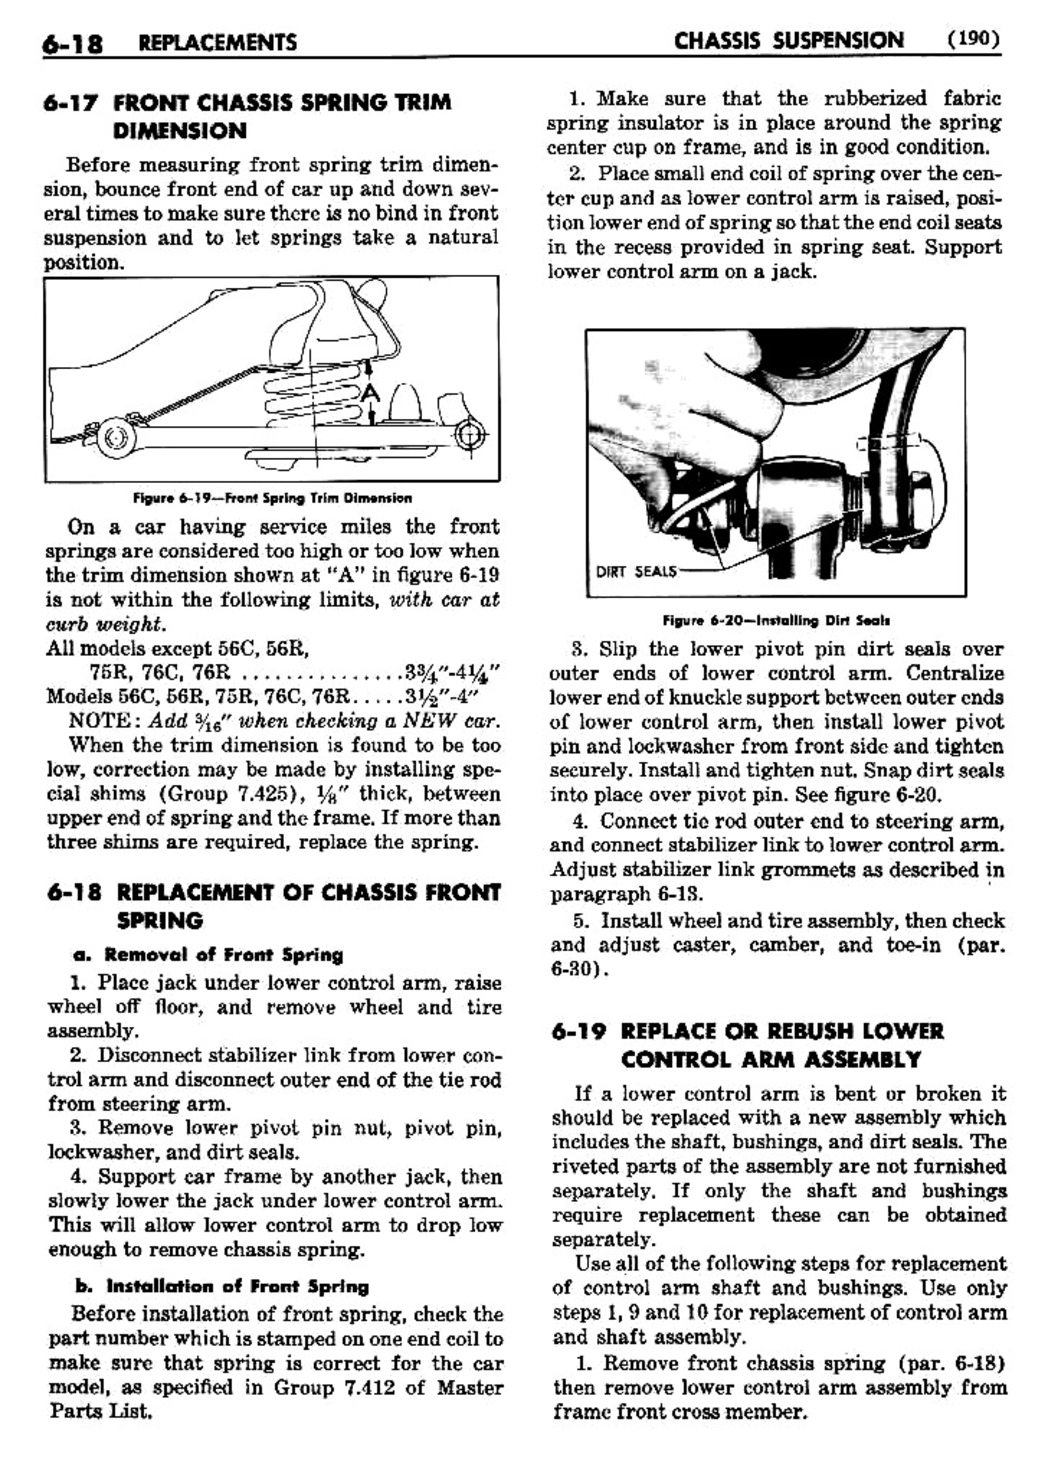 n_07 1950 Buick Shop Manual - Chassis Suspension-018-018.jpg